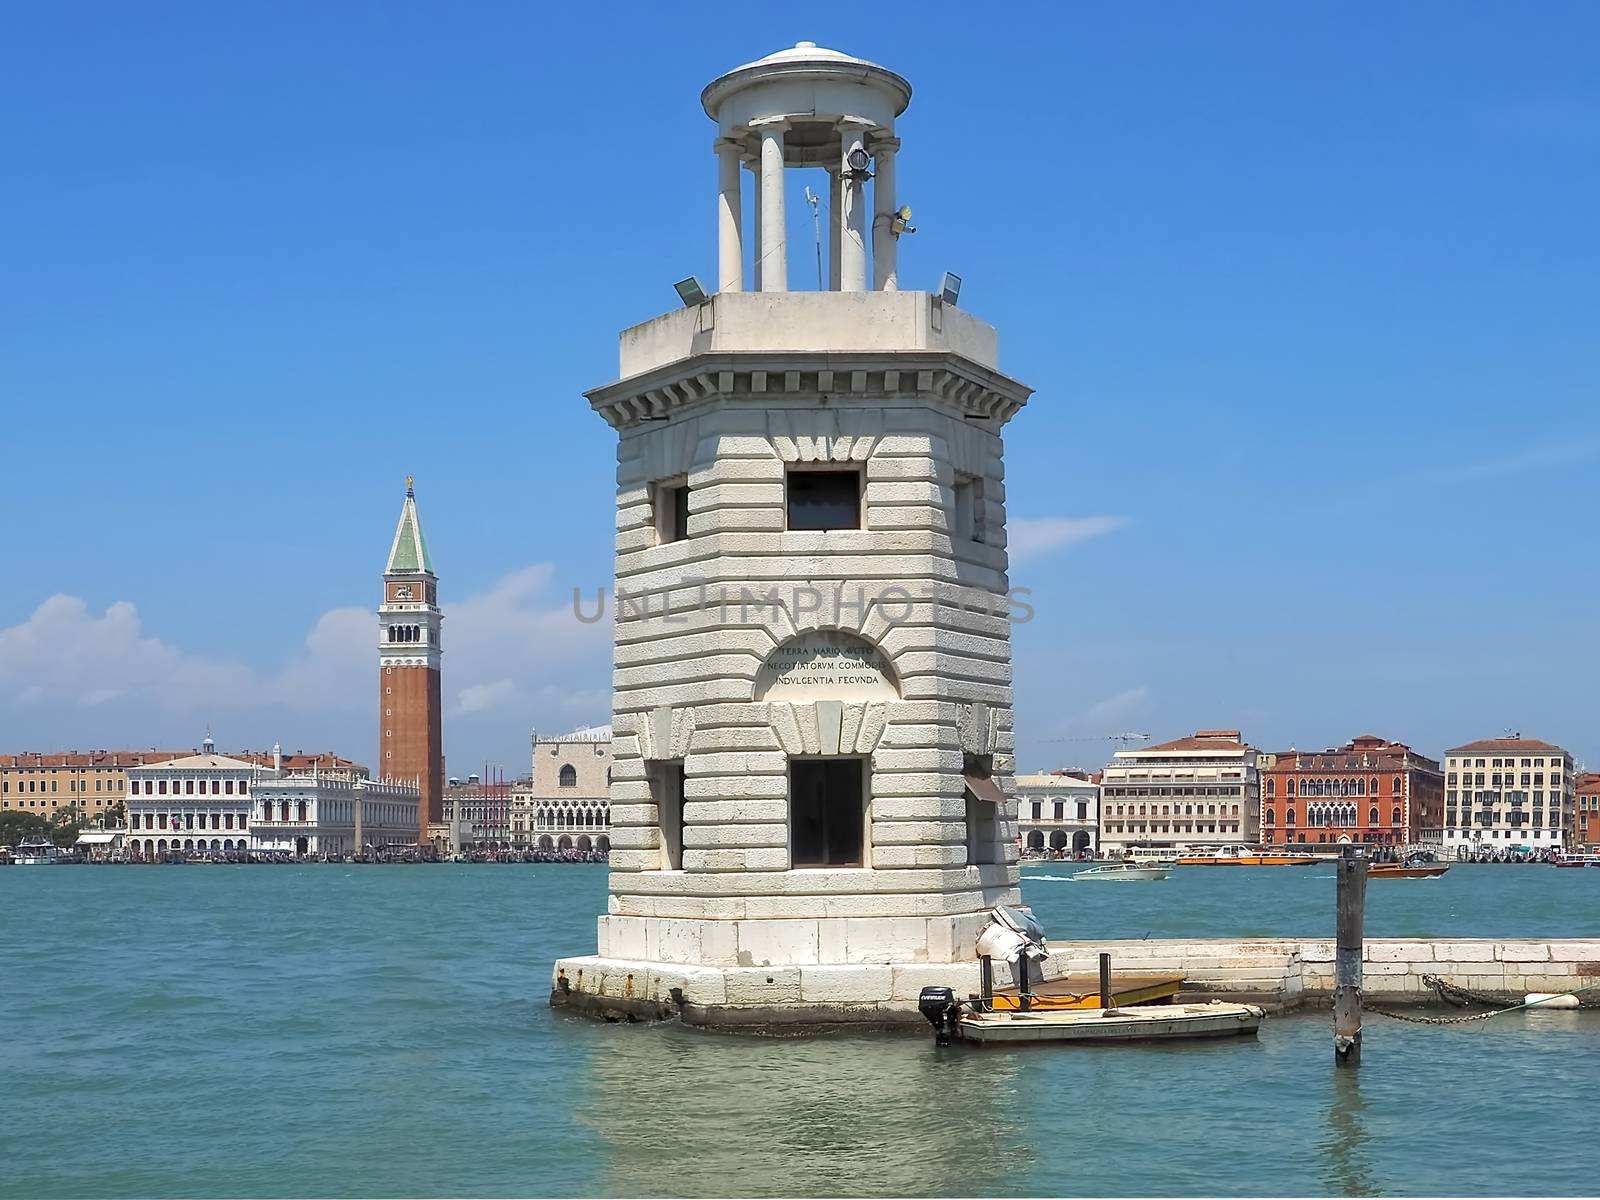 Lighthouse in Venice in Italy with the skyline